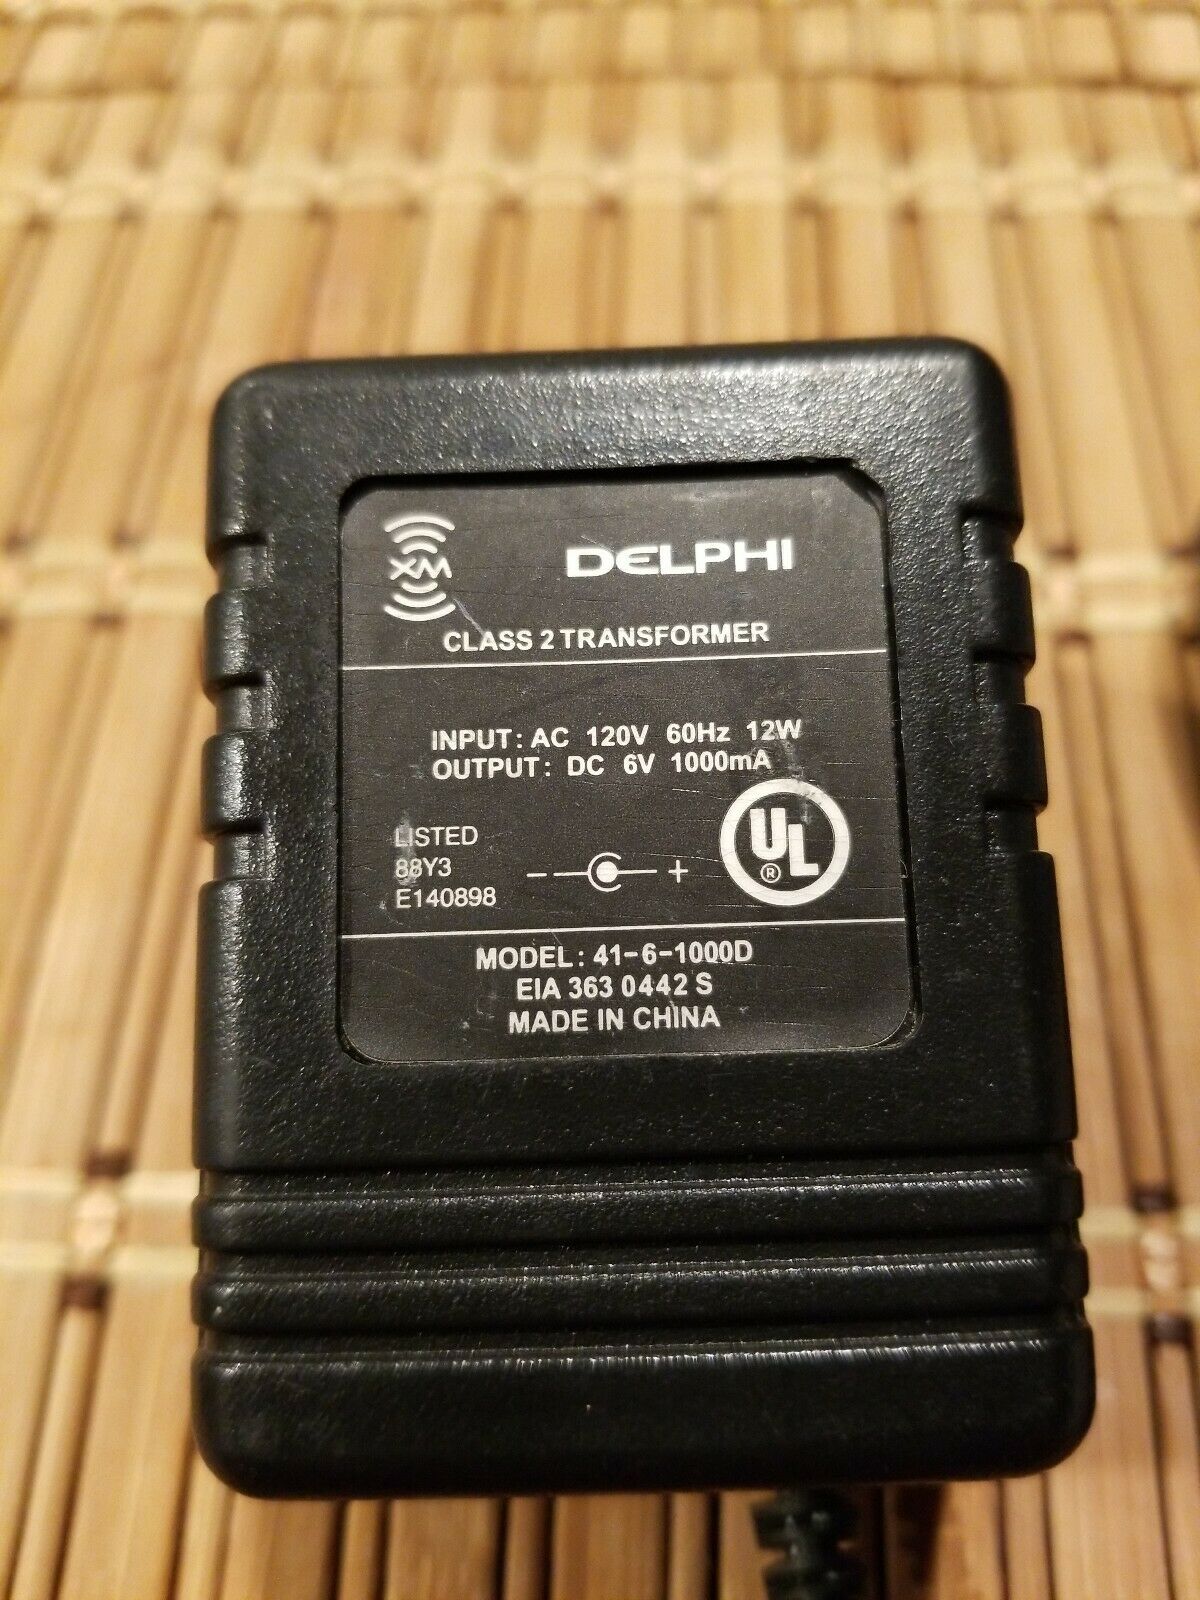 NEW Delphi 41-6-1000D 6V 1000mA Class 2 Transformer Power Adapter Charger